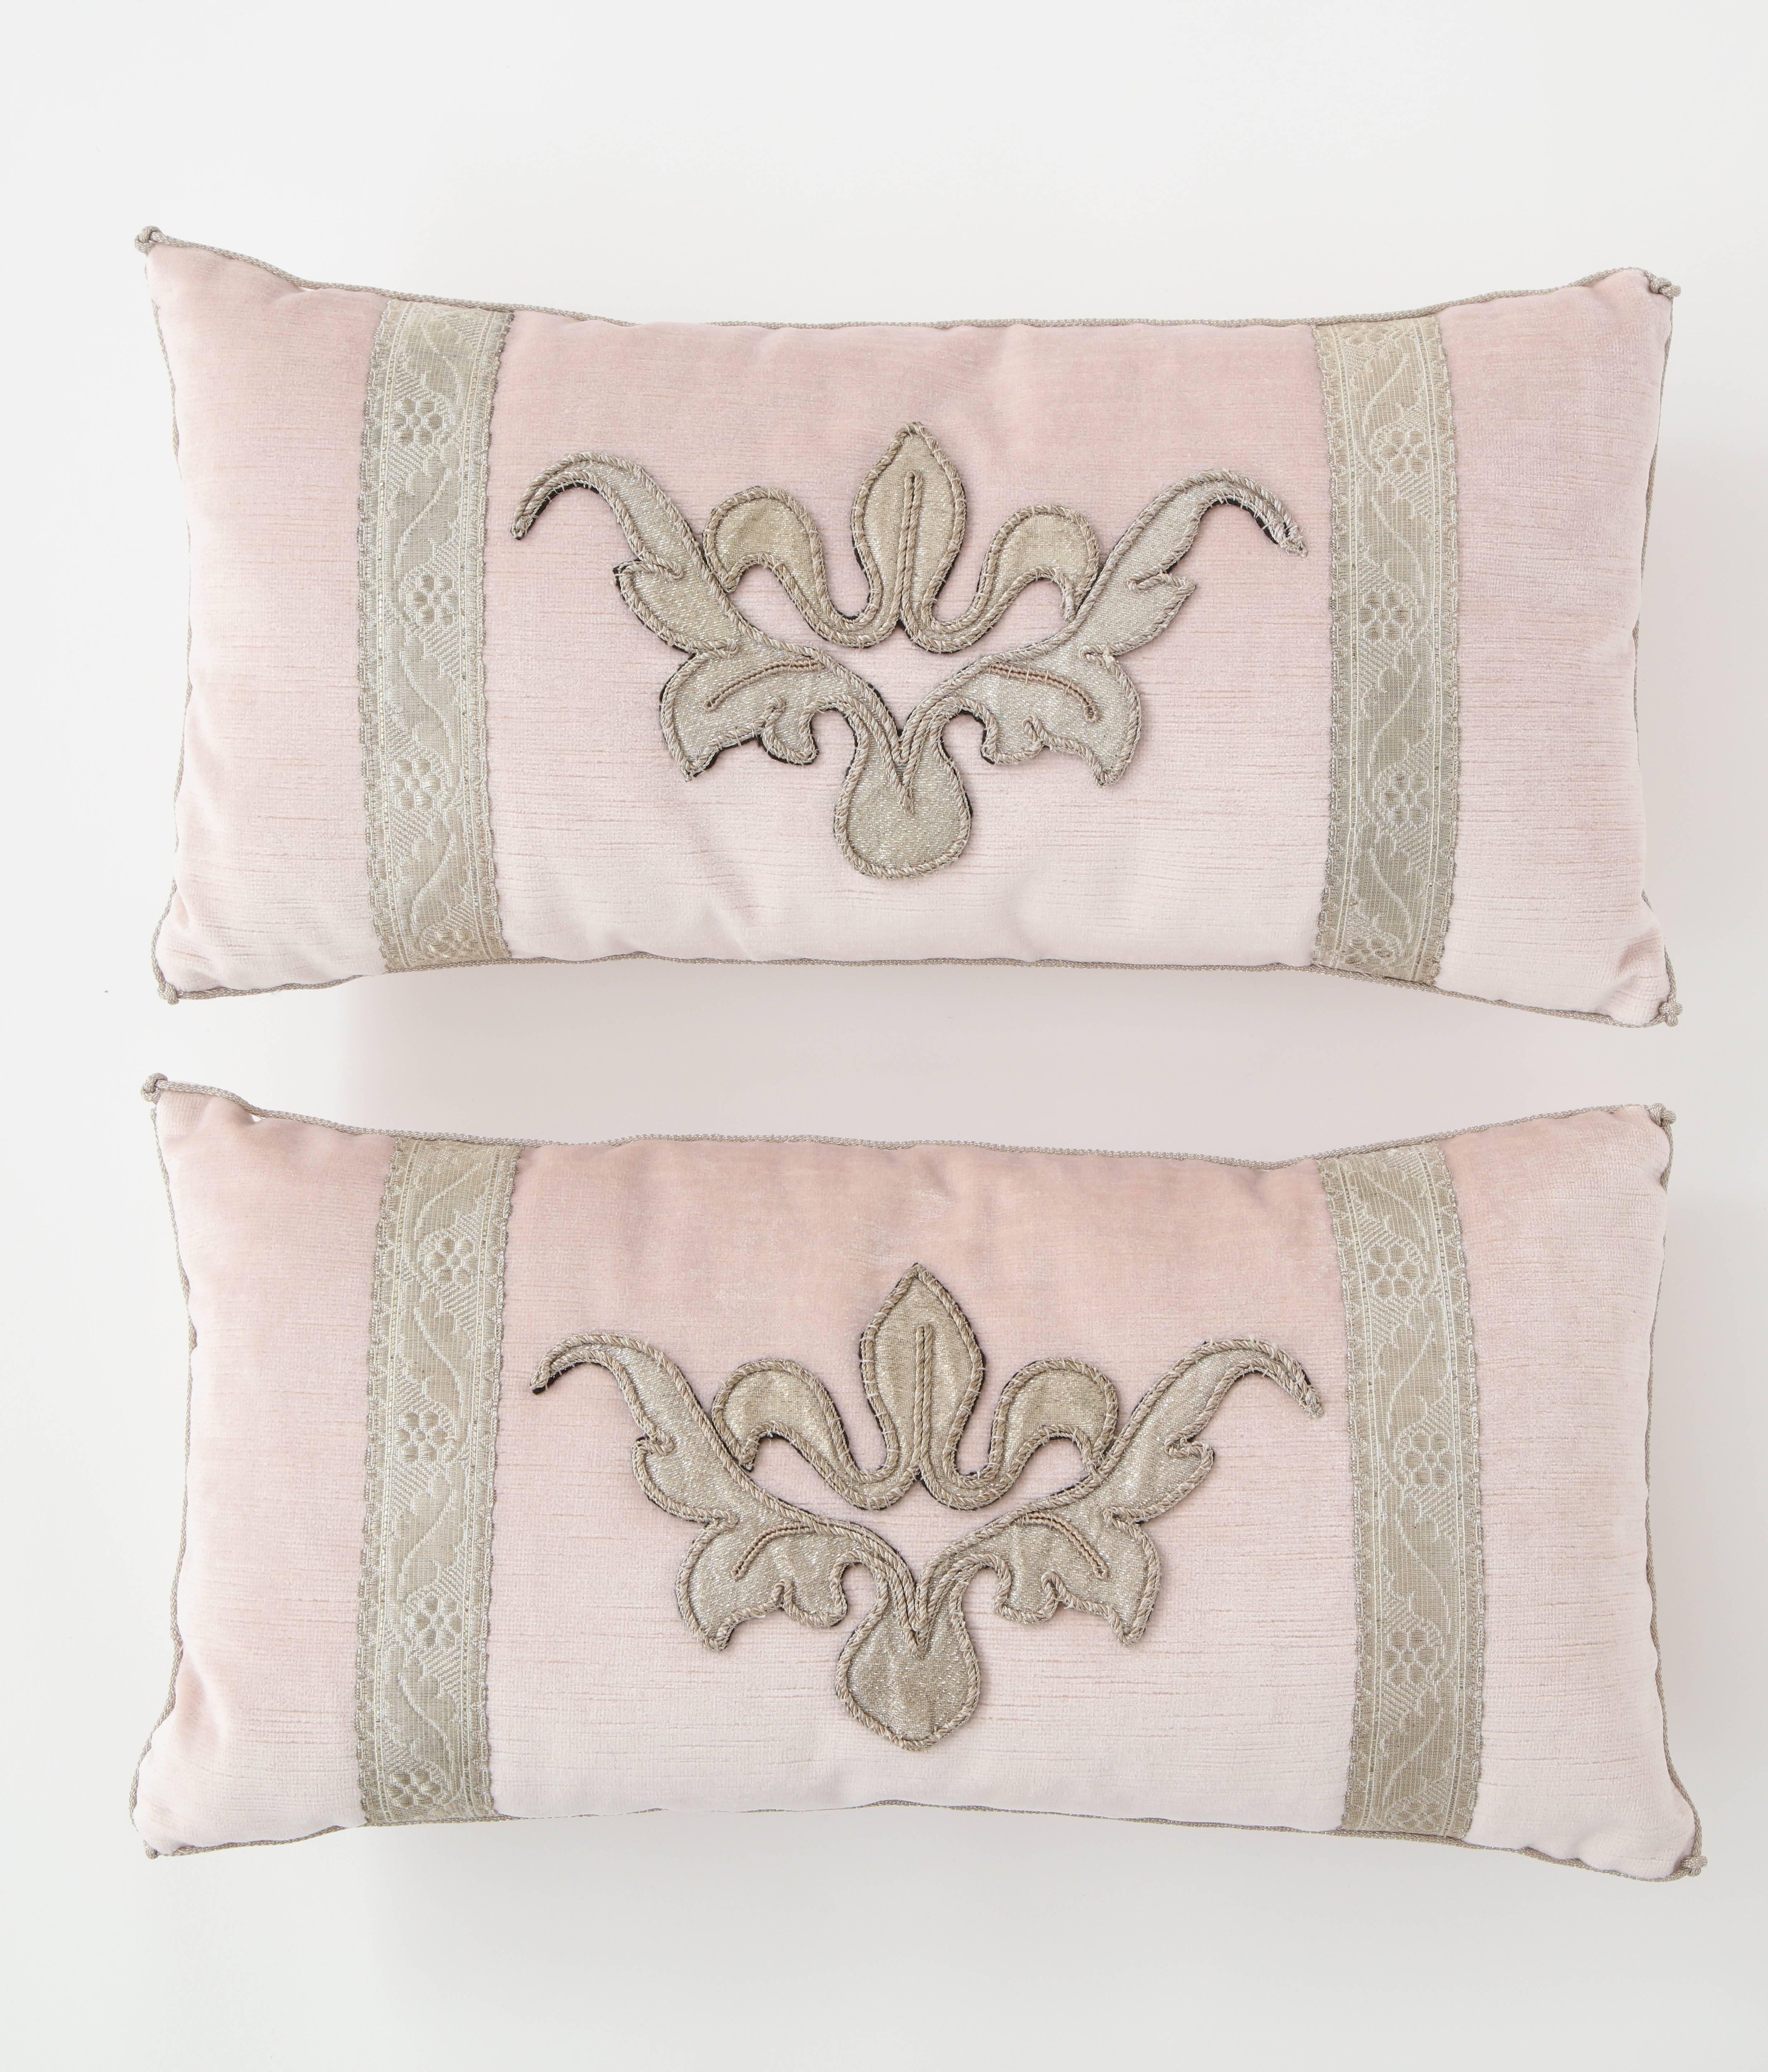 These beautiful pillows were designed by BViz Design and we are delighted to offer them in our shop. Crafted with antique metallic fragments, the pillows feature a fleur-de-lis design in the centre bordered by antique trim on either side. They are